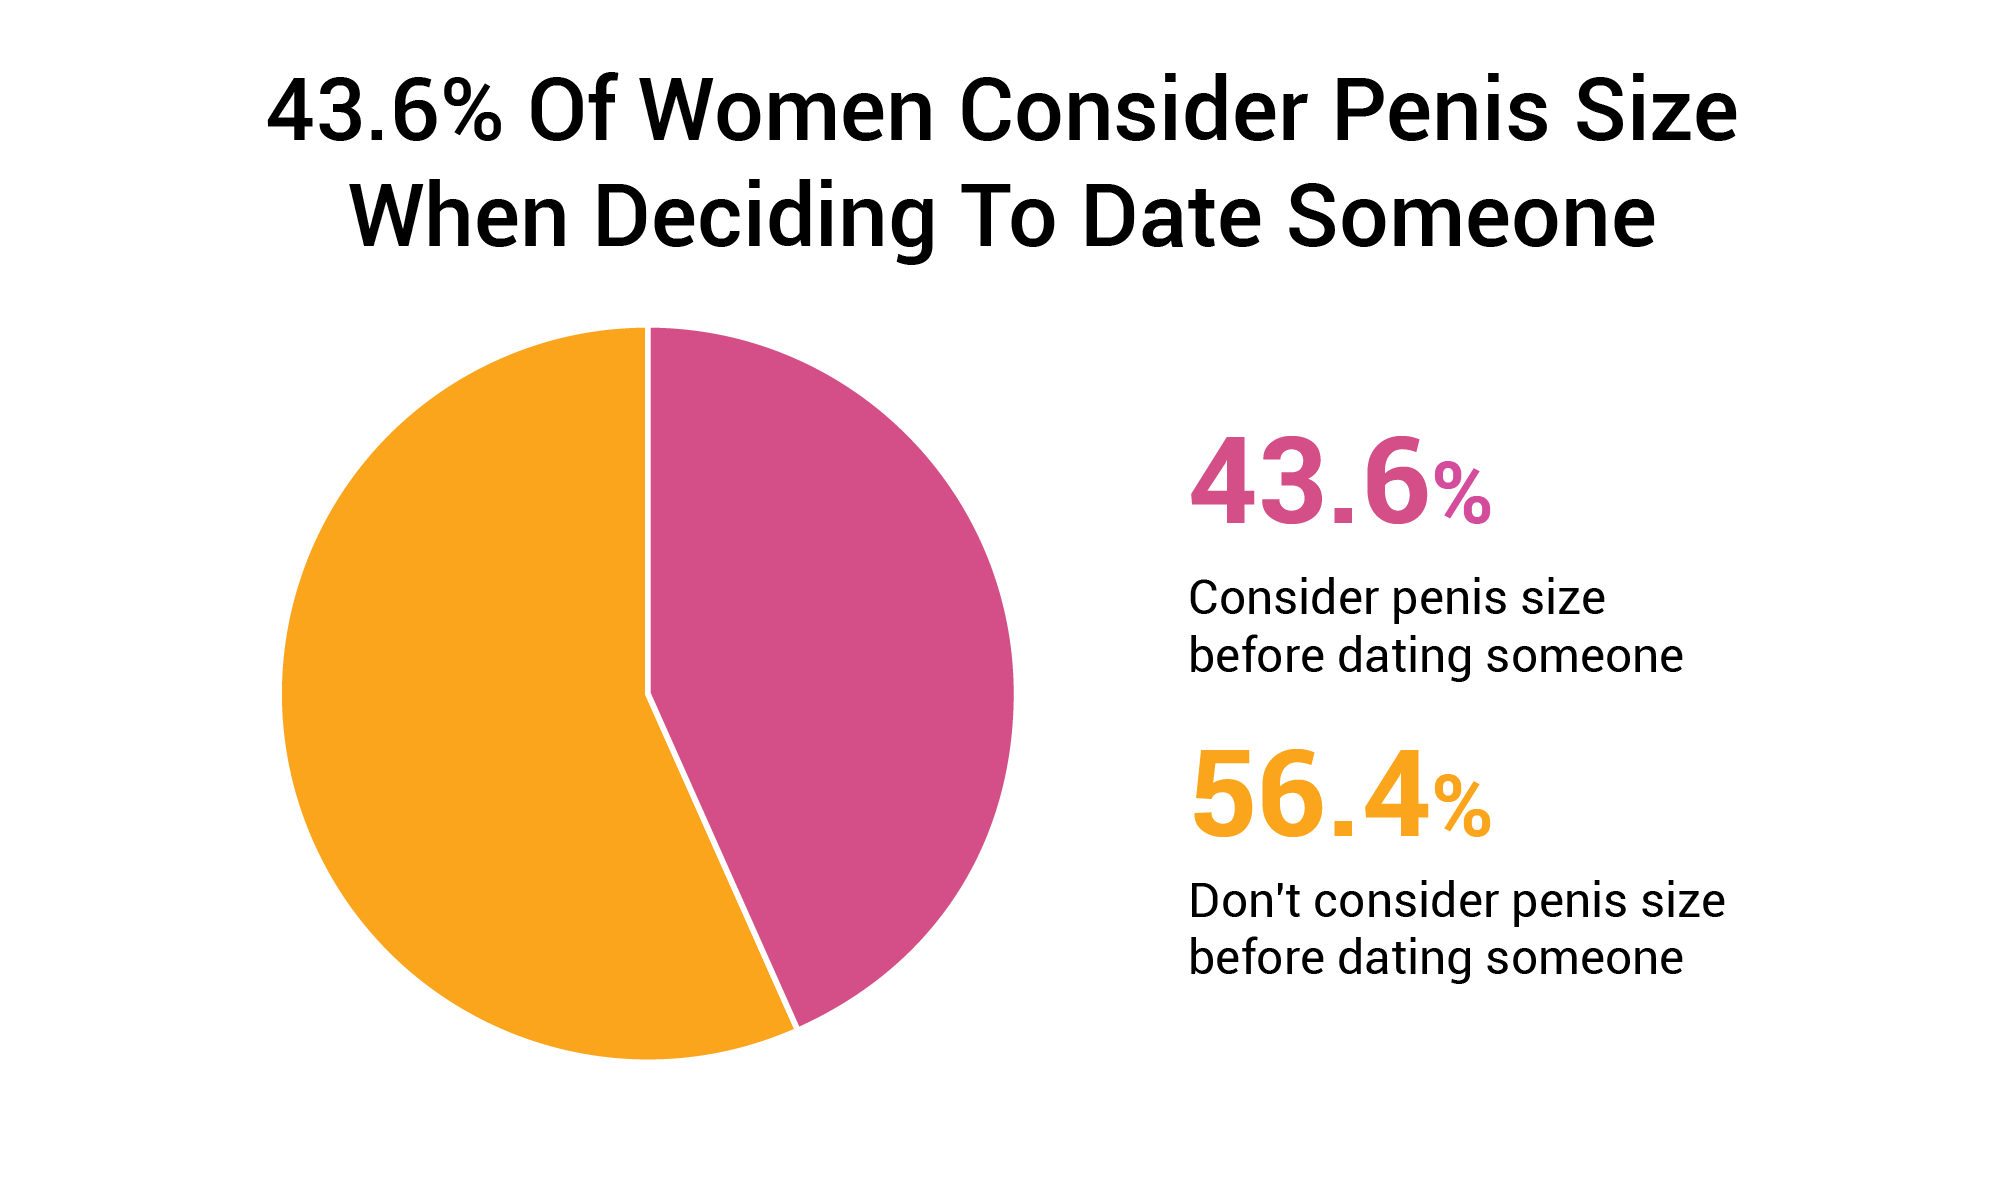 43.6-of-women-consider-penis-size-when-deciding-to-date-someone.png